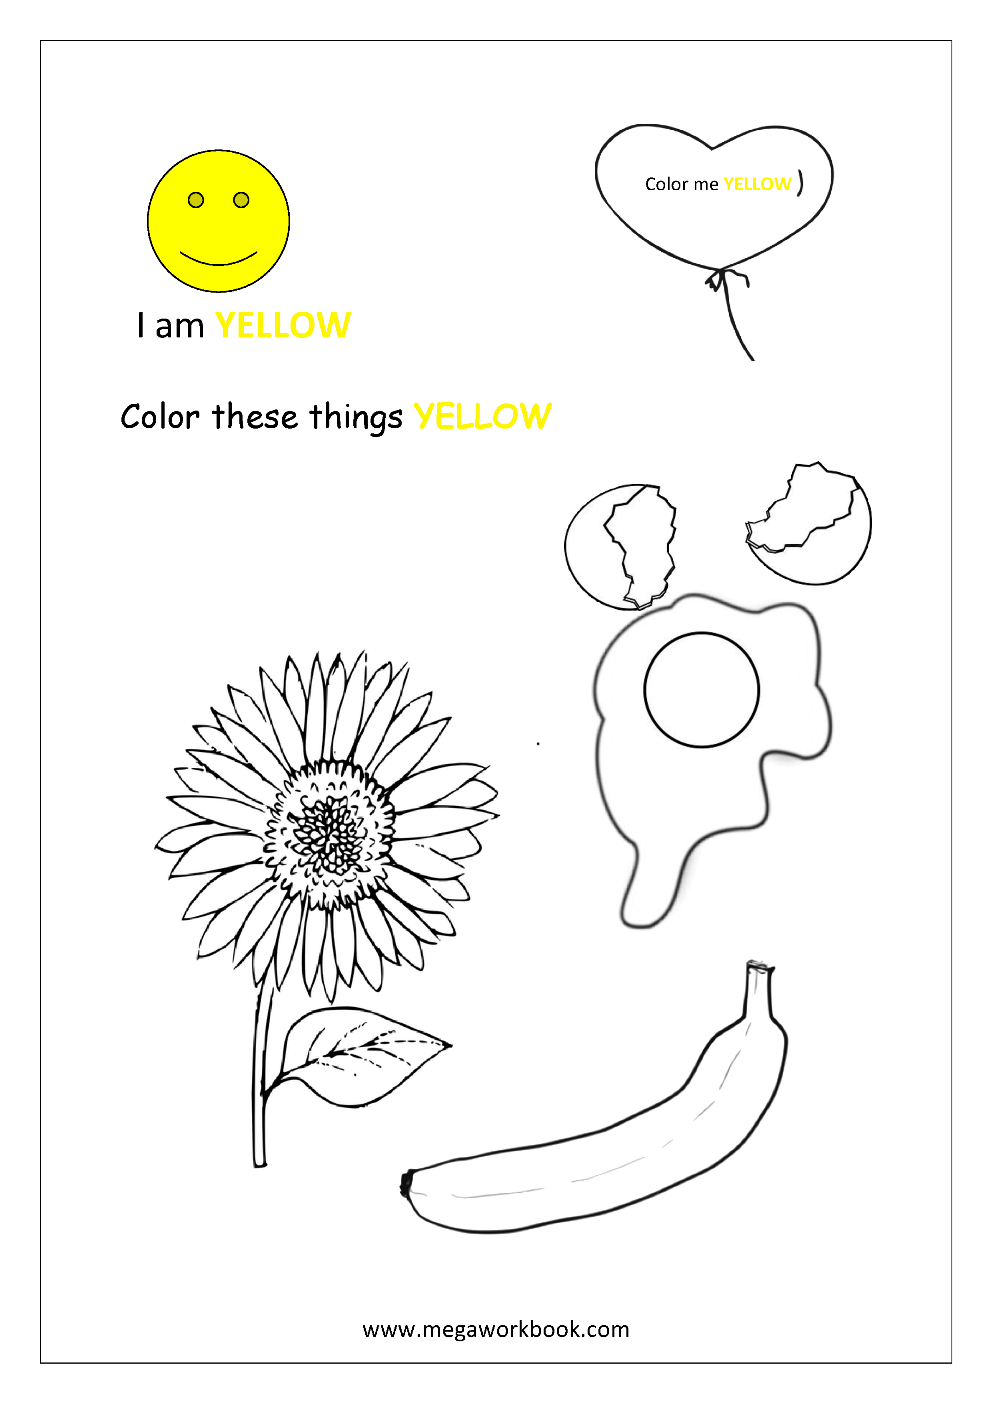 learn colors red coloring pages blue coloring pages yellow coloring pages green coloring pages black white brown gray purple orange pink colors coloring pages megaworkbook